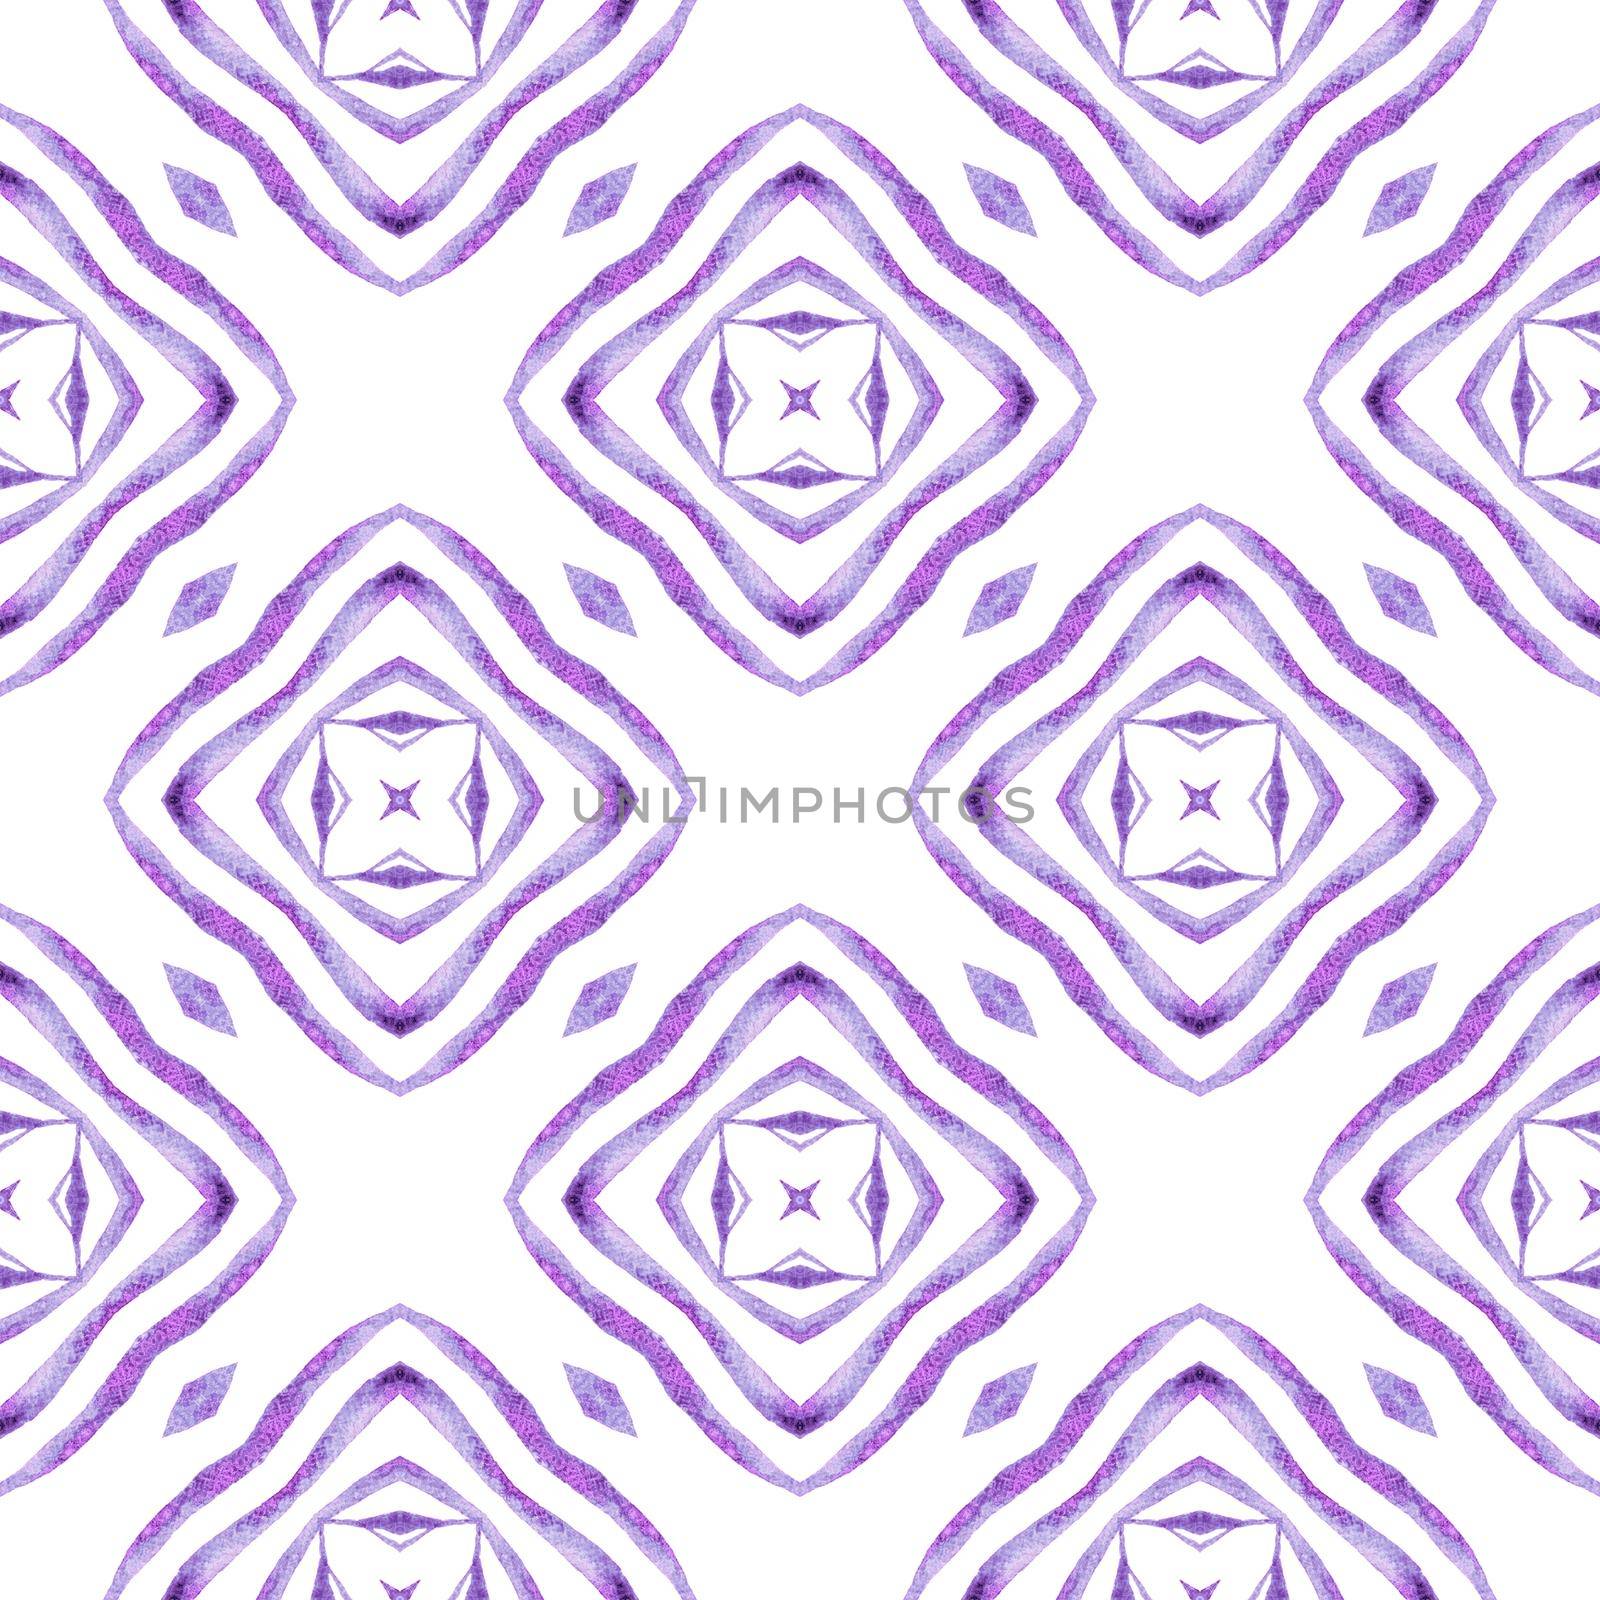 Watercolor summer ethnic border pattern. Purple surprising boho chic summer design. Textile ready artistic print, swimwear fabric, wallpaper, wrapping. Ethnic hand painted pattern.